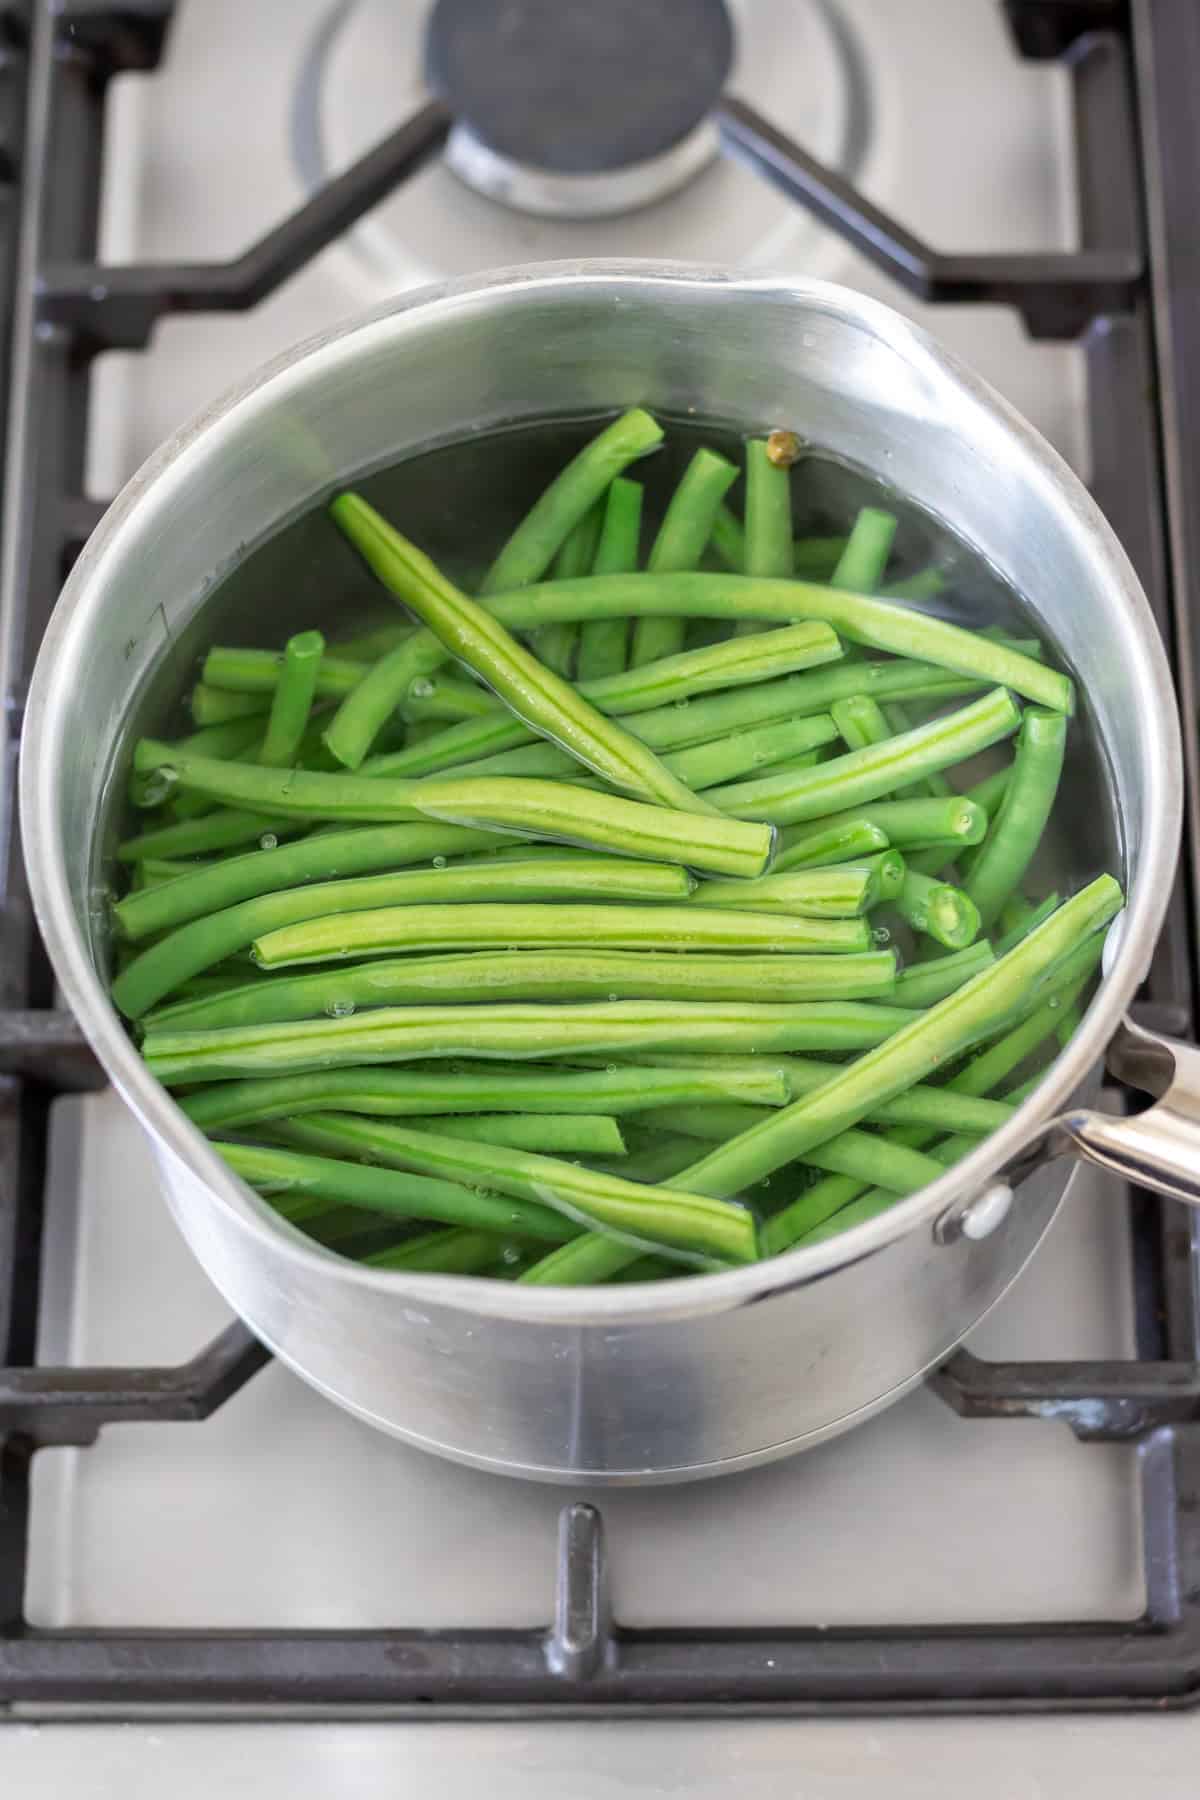 Green beans in the pan of boiled water.